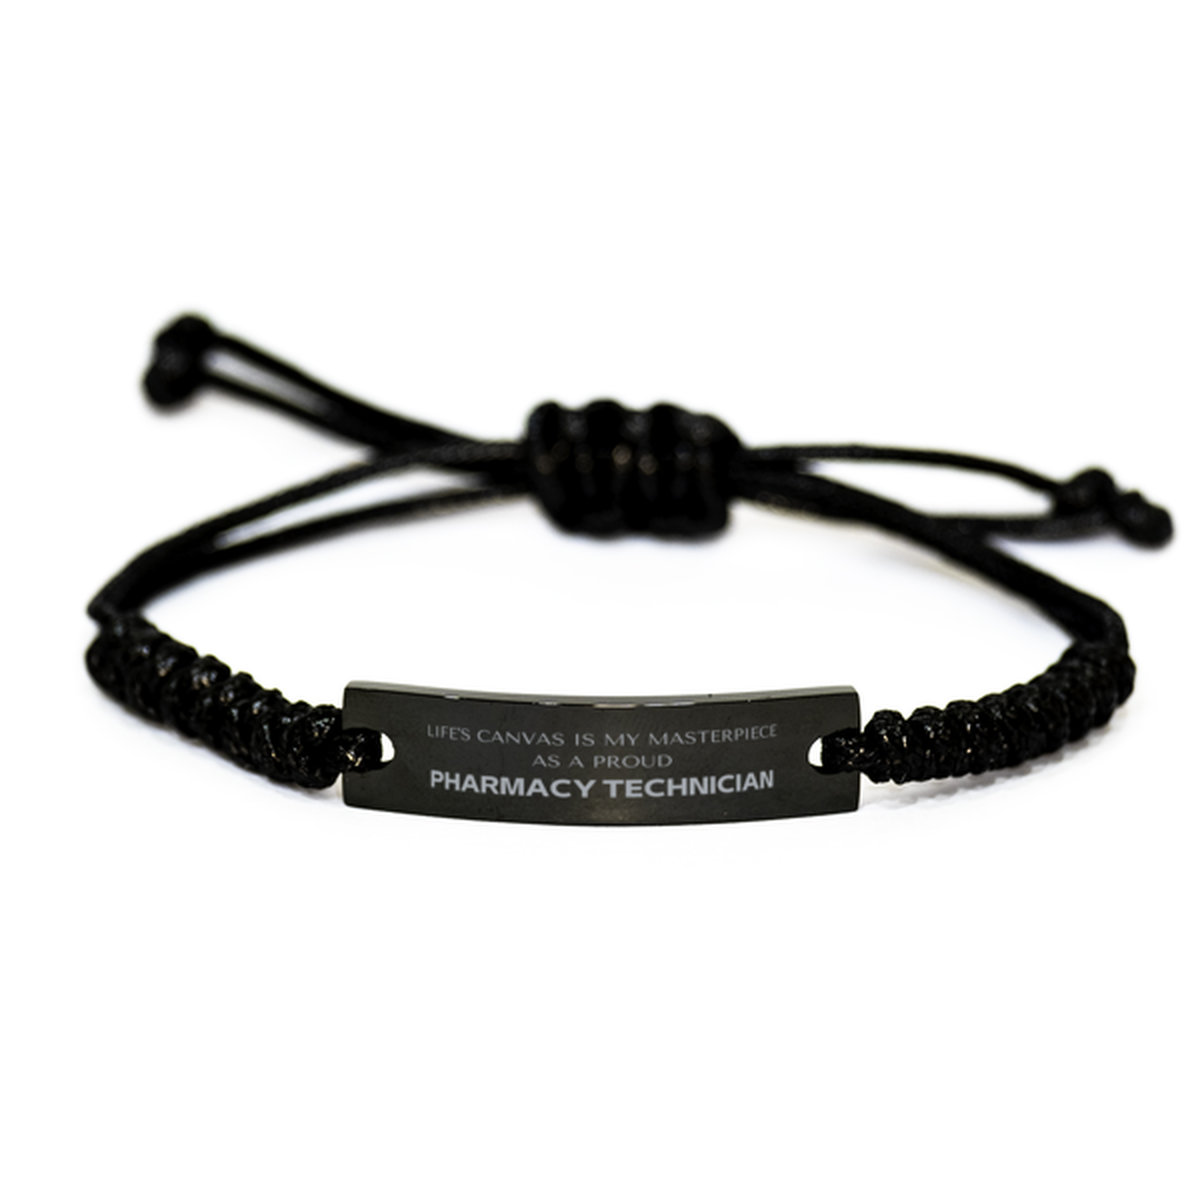 Proud Pharmacy Technician Gifts, Life's canvas is my masterpiece, Epic Birthday Christmas Unique Black Rope Bracelet For Pharmacy Technician, Coworkers, Men, Women, Friends